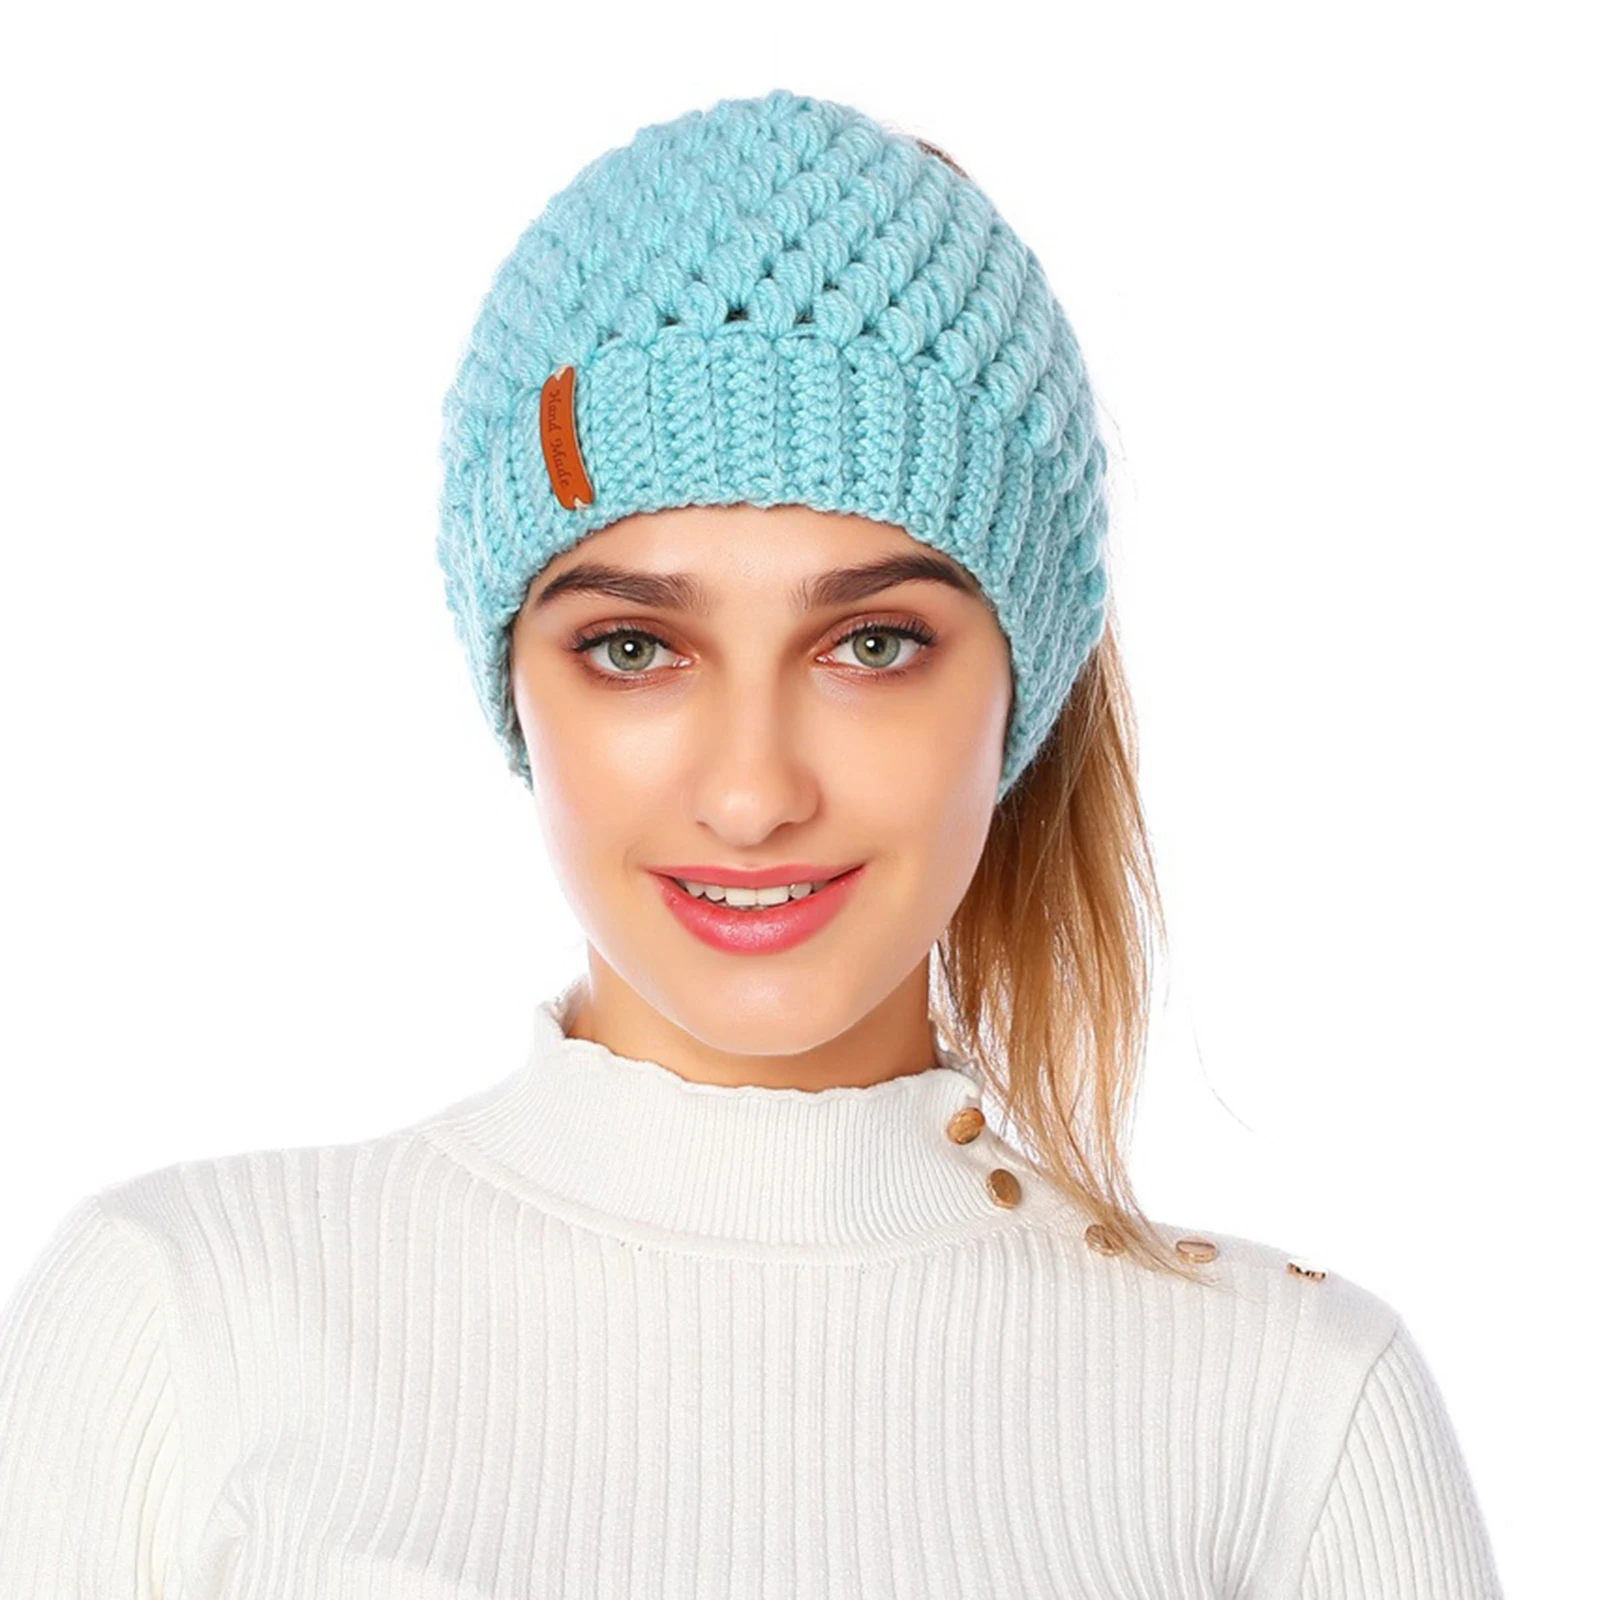 Winter Knitting Hats Warm Women Ladies Girl Stretch Knit Messy Bun Ponytail Beanie Holey Hats Caps for Outdoor Sports